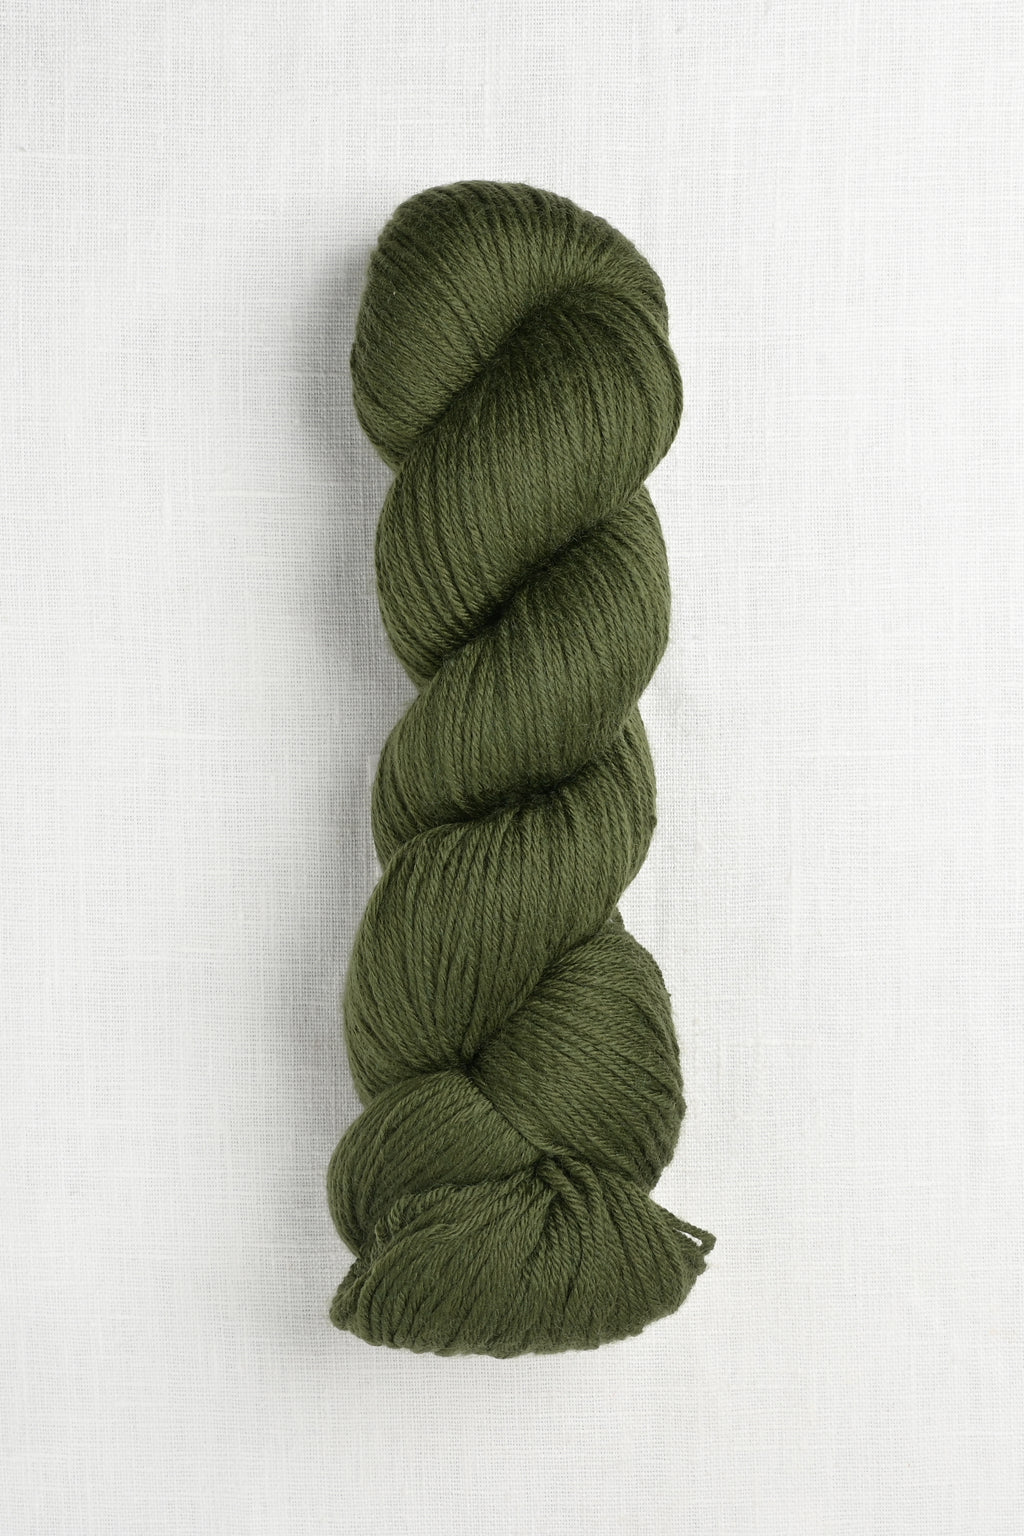 6 Heritage Cascade Company Mossy – 5634 Wool Rock and